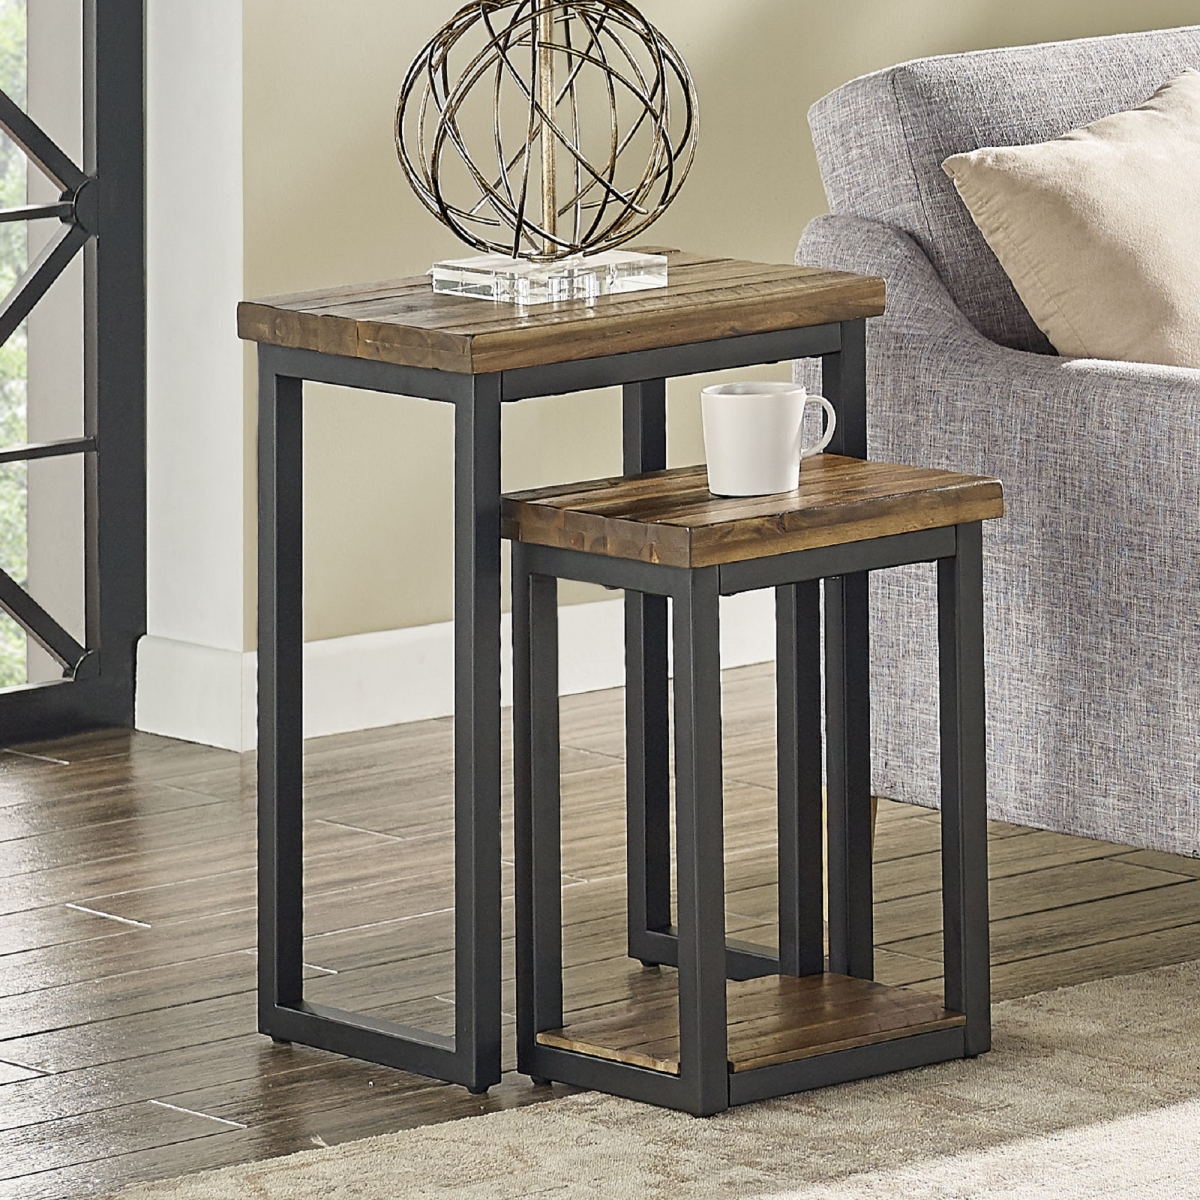 Picture of Alaterre ANCM0174N Claremont Rustic Wood Nesting End Tables - Set of 2